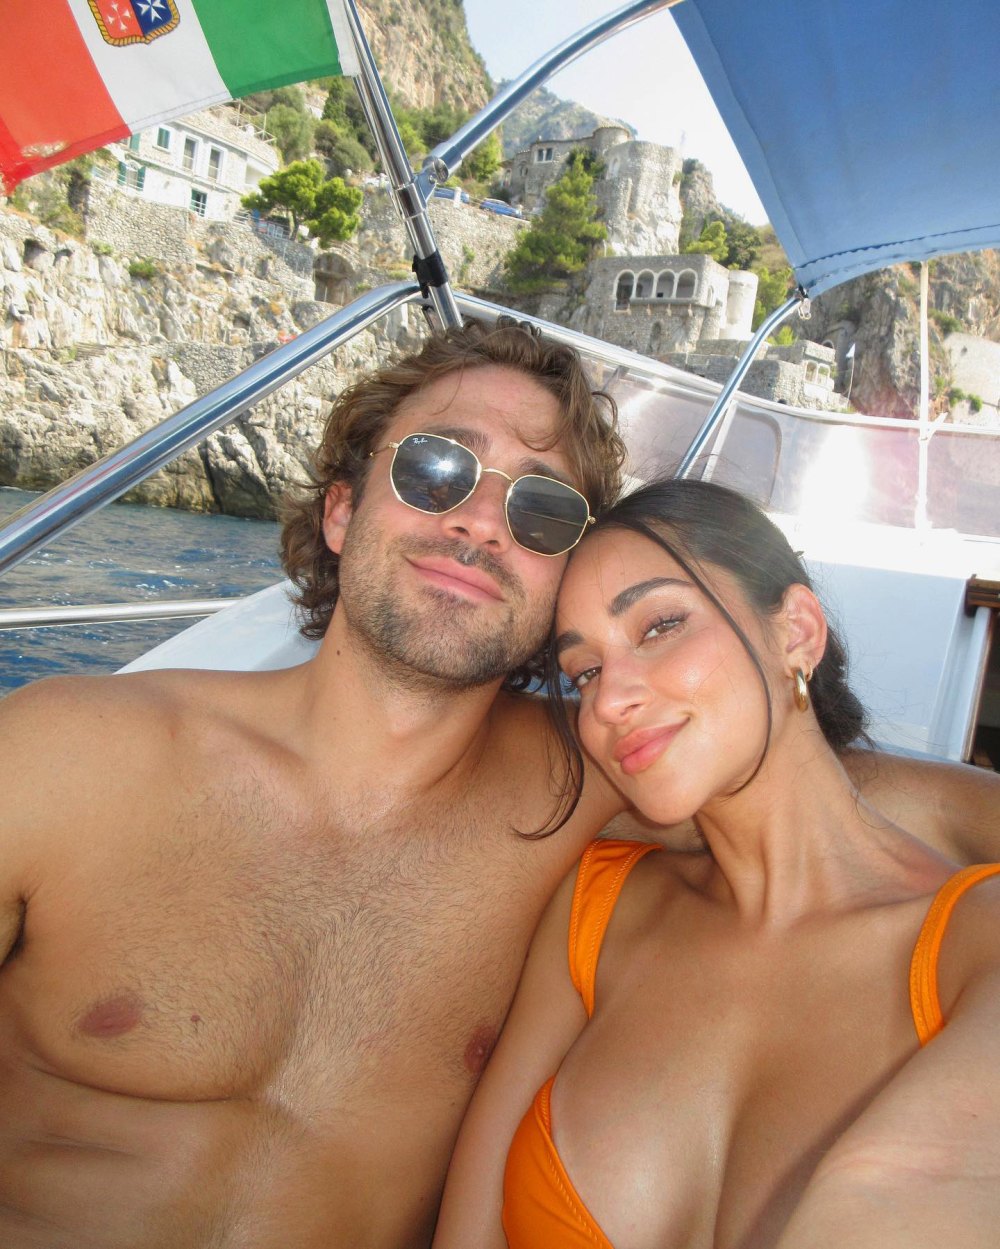 Greg Grippo shirtless, wearing sunglasses with arm around Victoria Fuller wearing orange bikini as they smile on a boat on the Amalfi Coast